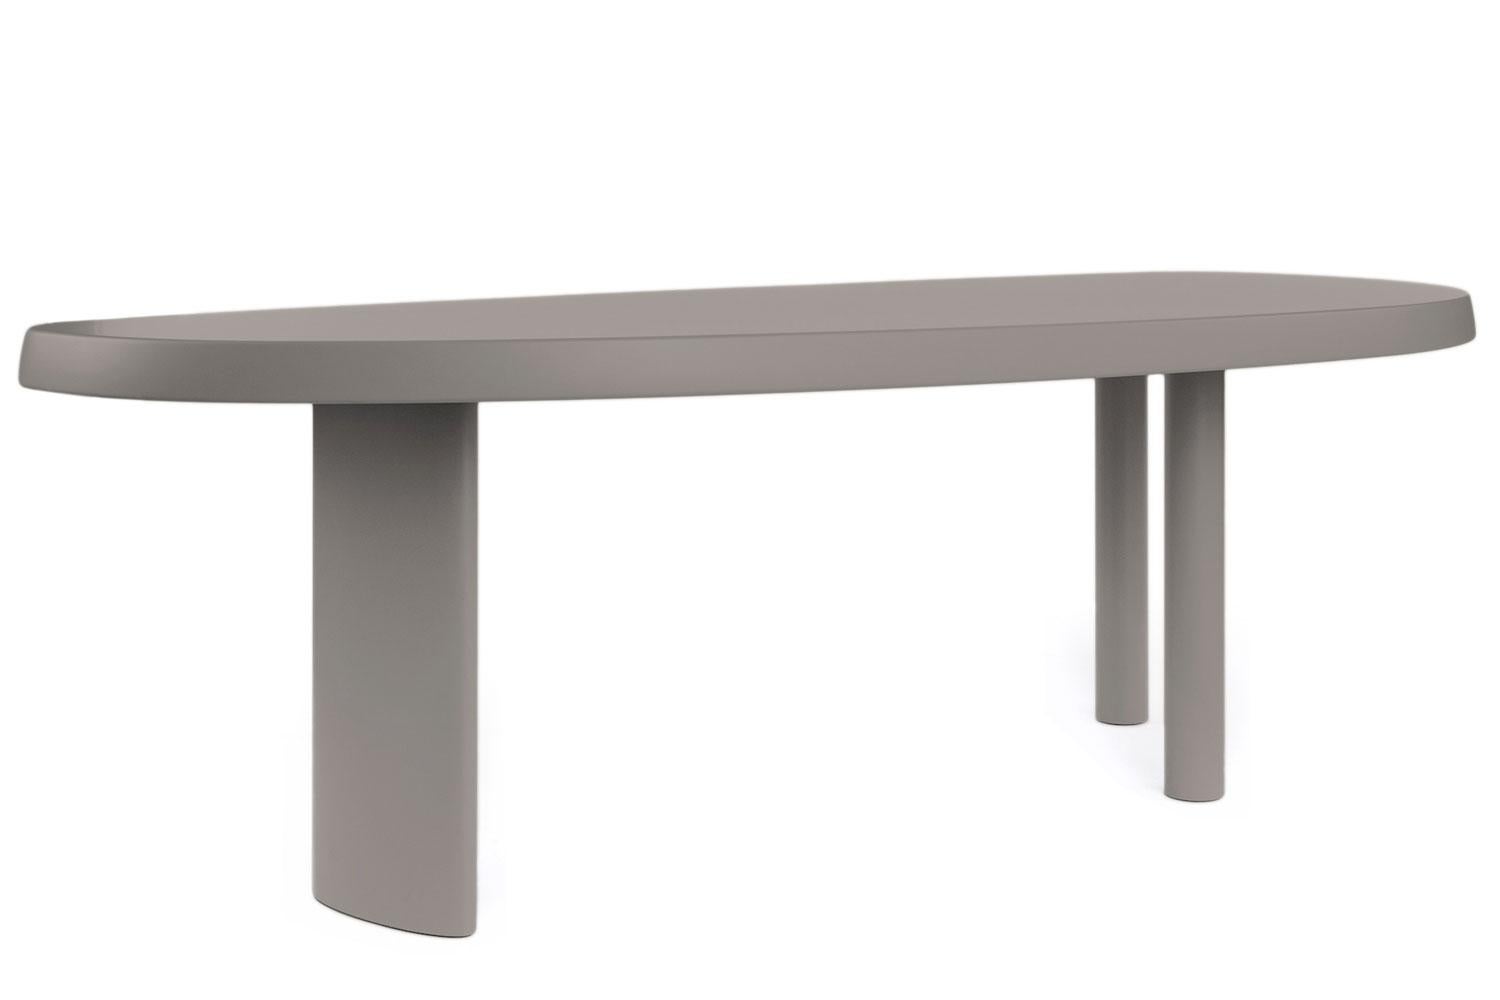 Italian Mud Matte Lacquer Finished Solid Oak Dining Table, Cassina For Sale